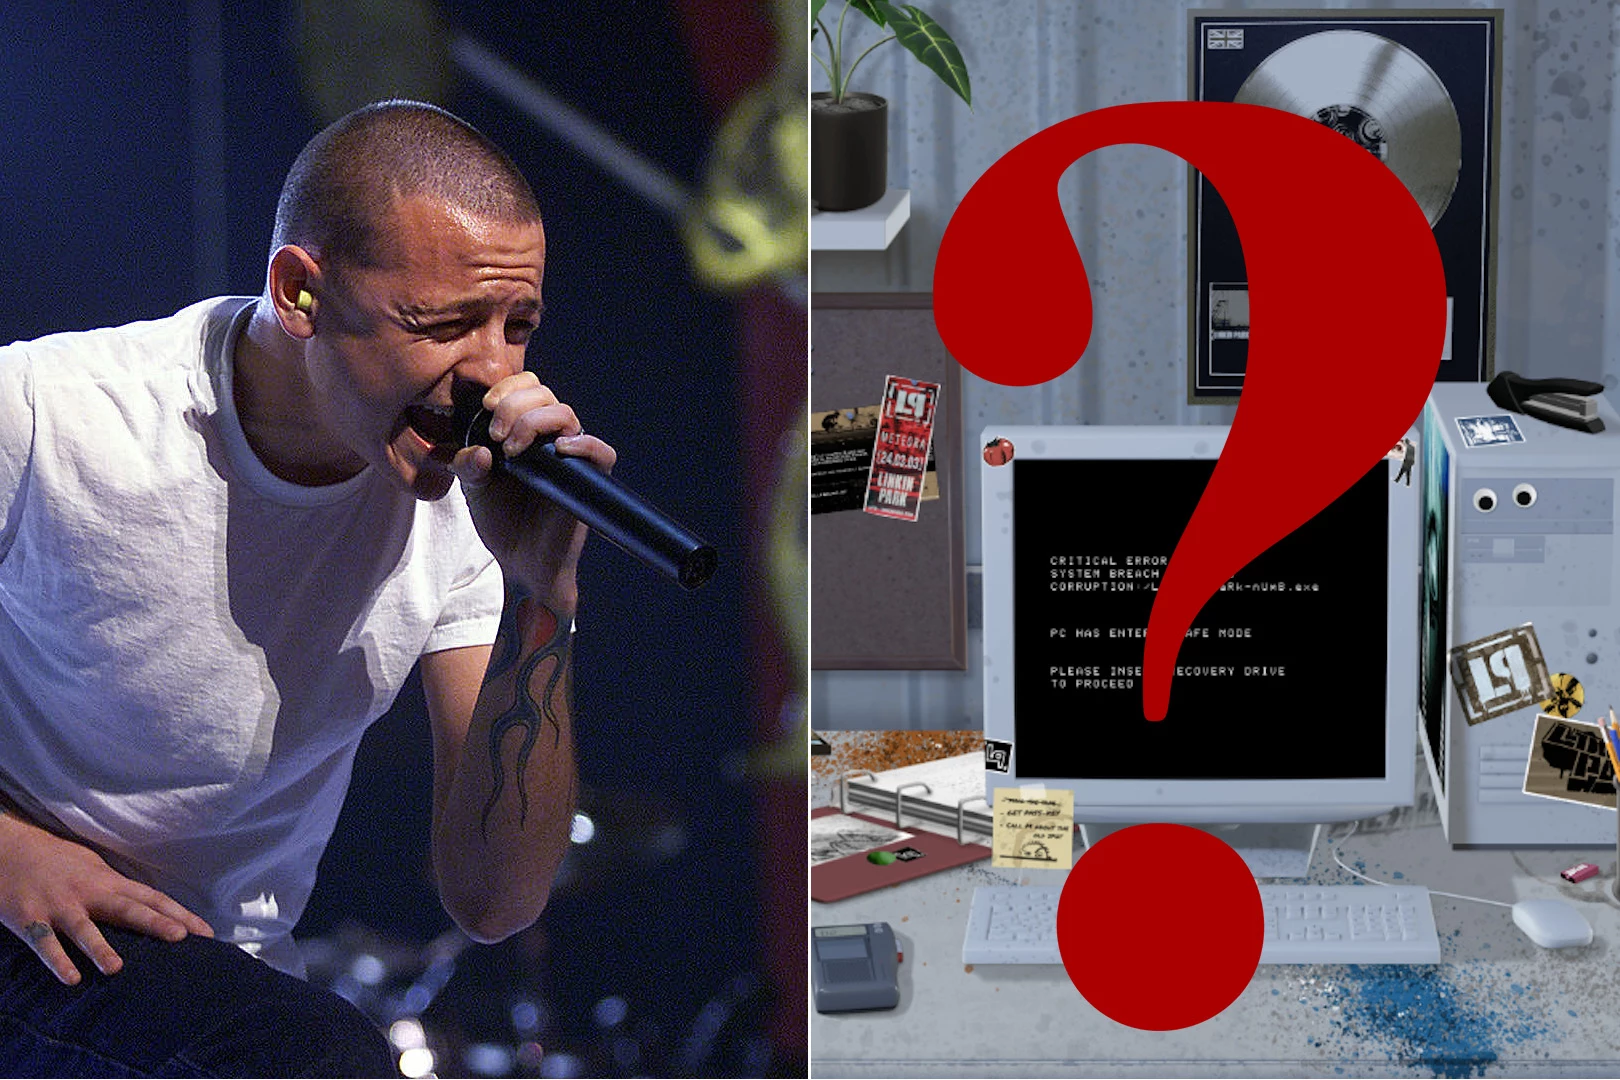 Linkin Park Launch Puzzle on Website, Here's What We've Uncovered